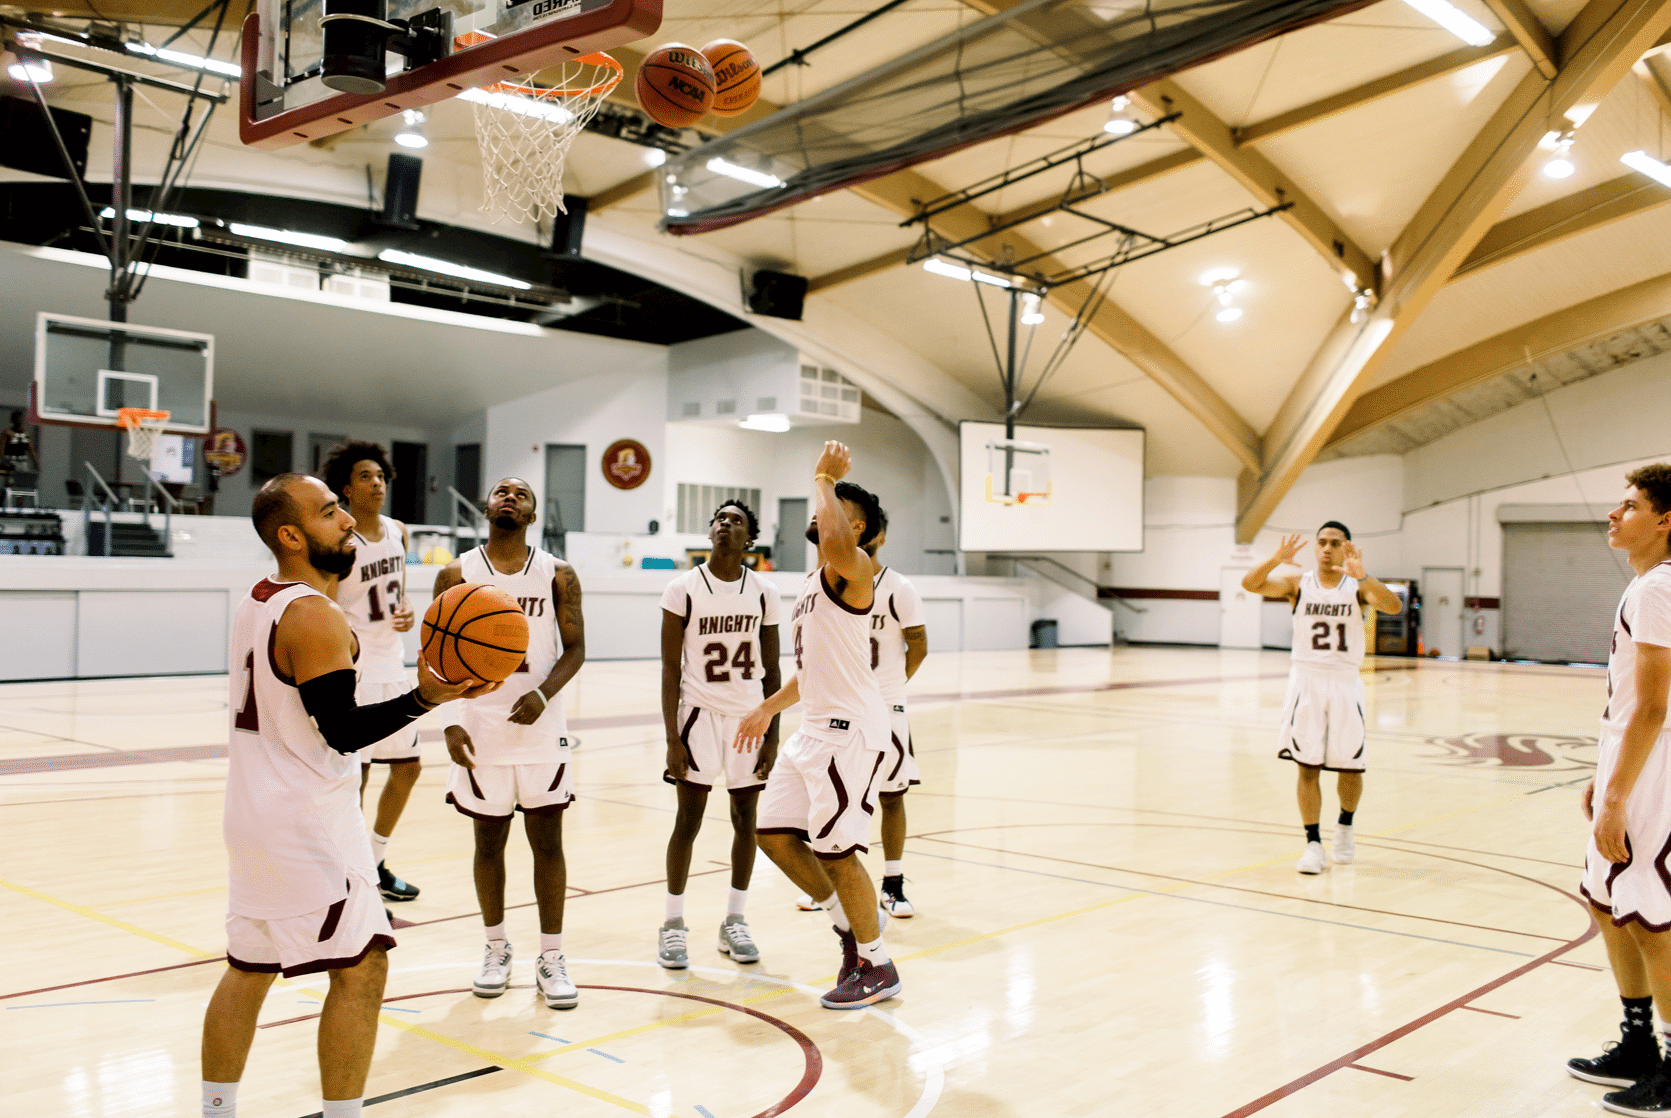 A group of male basketball players gather in the gymnasium wearing their uniforms as thye throw balls into the hoop and look around